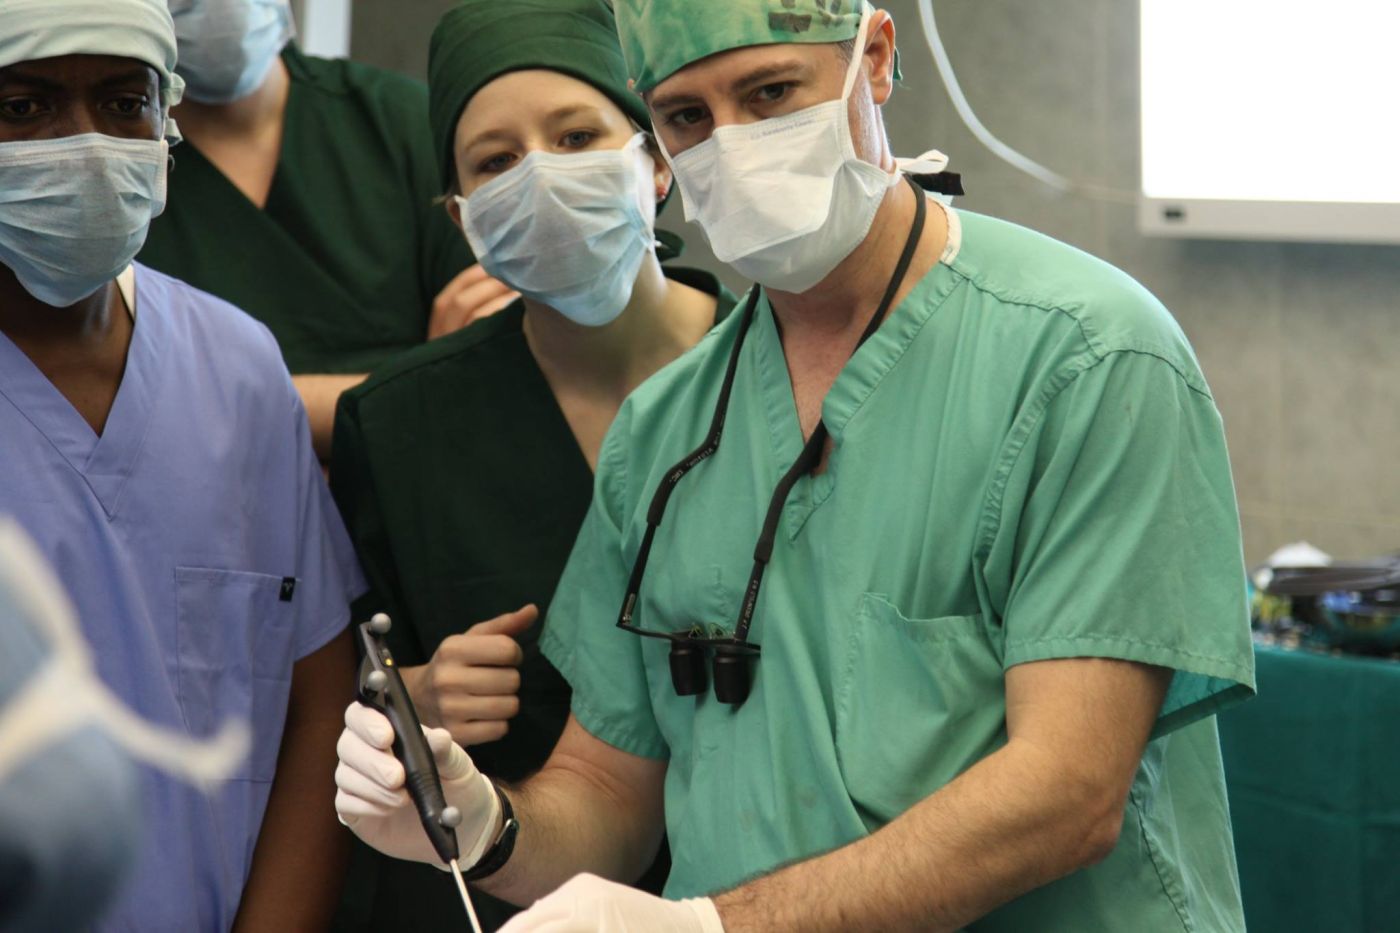 Dr. Greenfield in surgery, Tanzania 2014